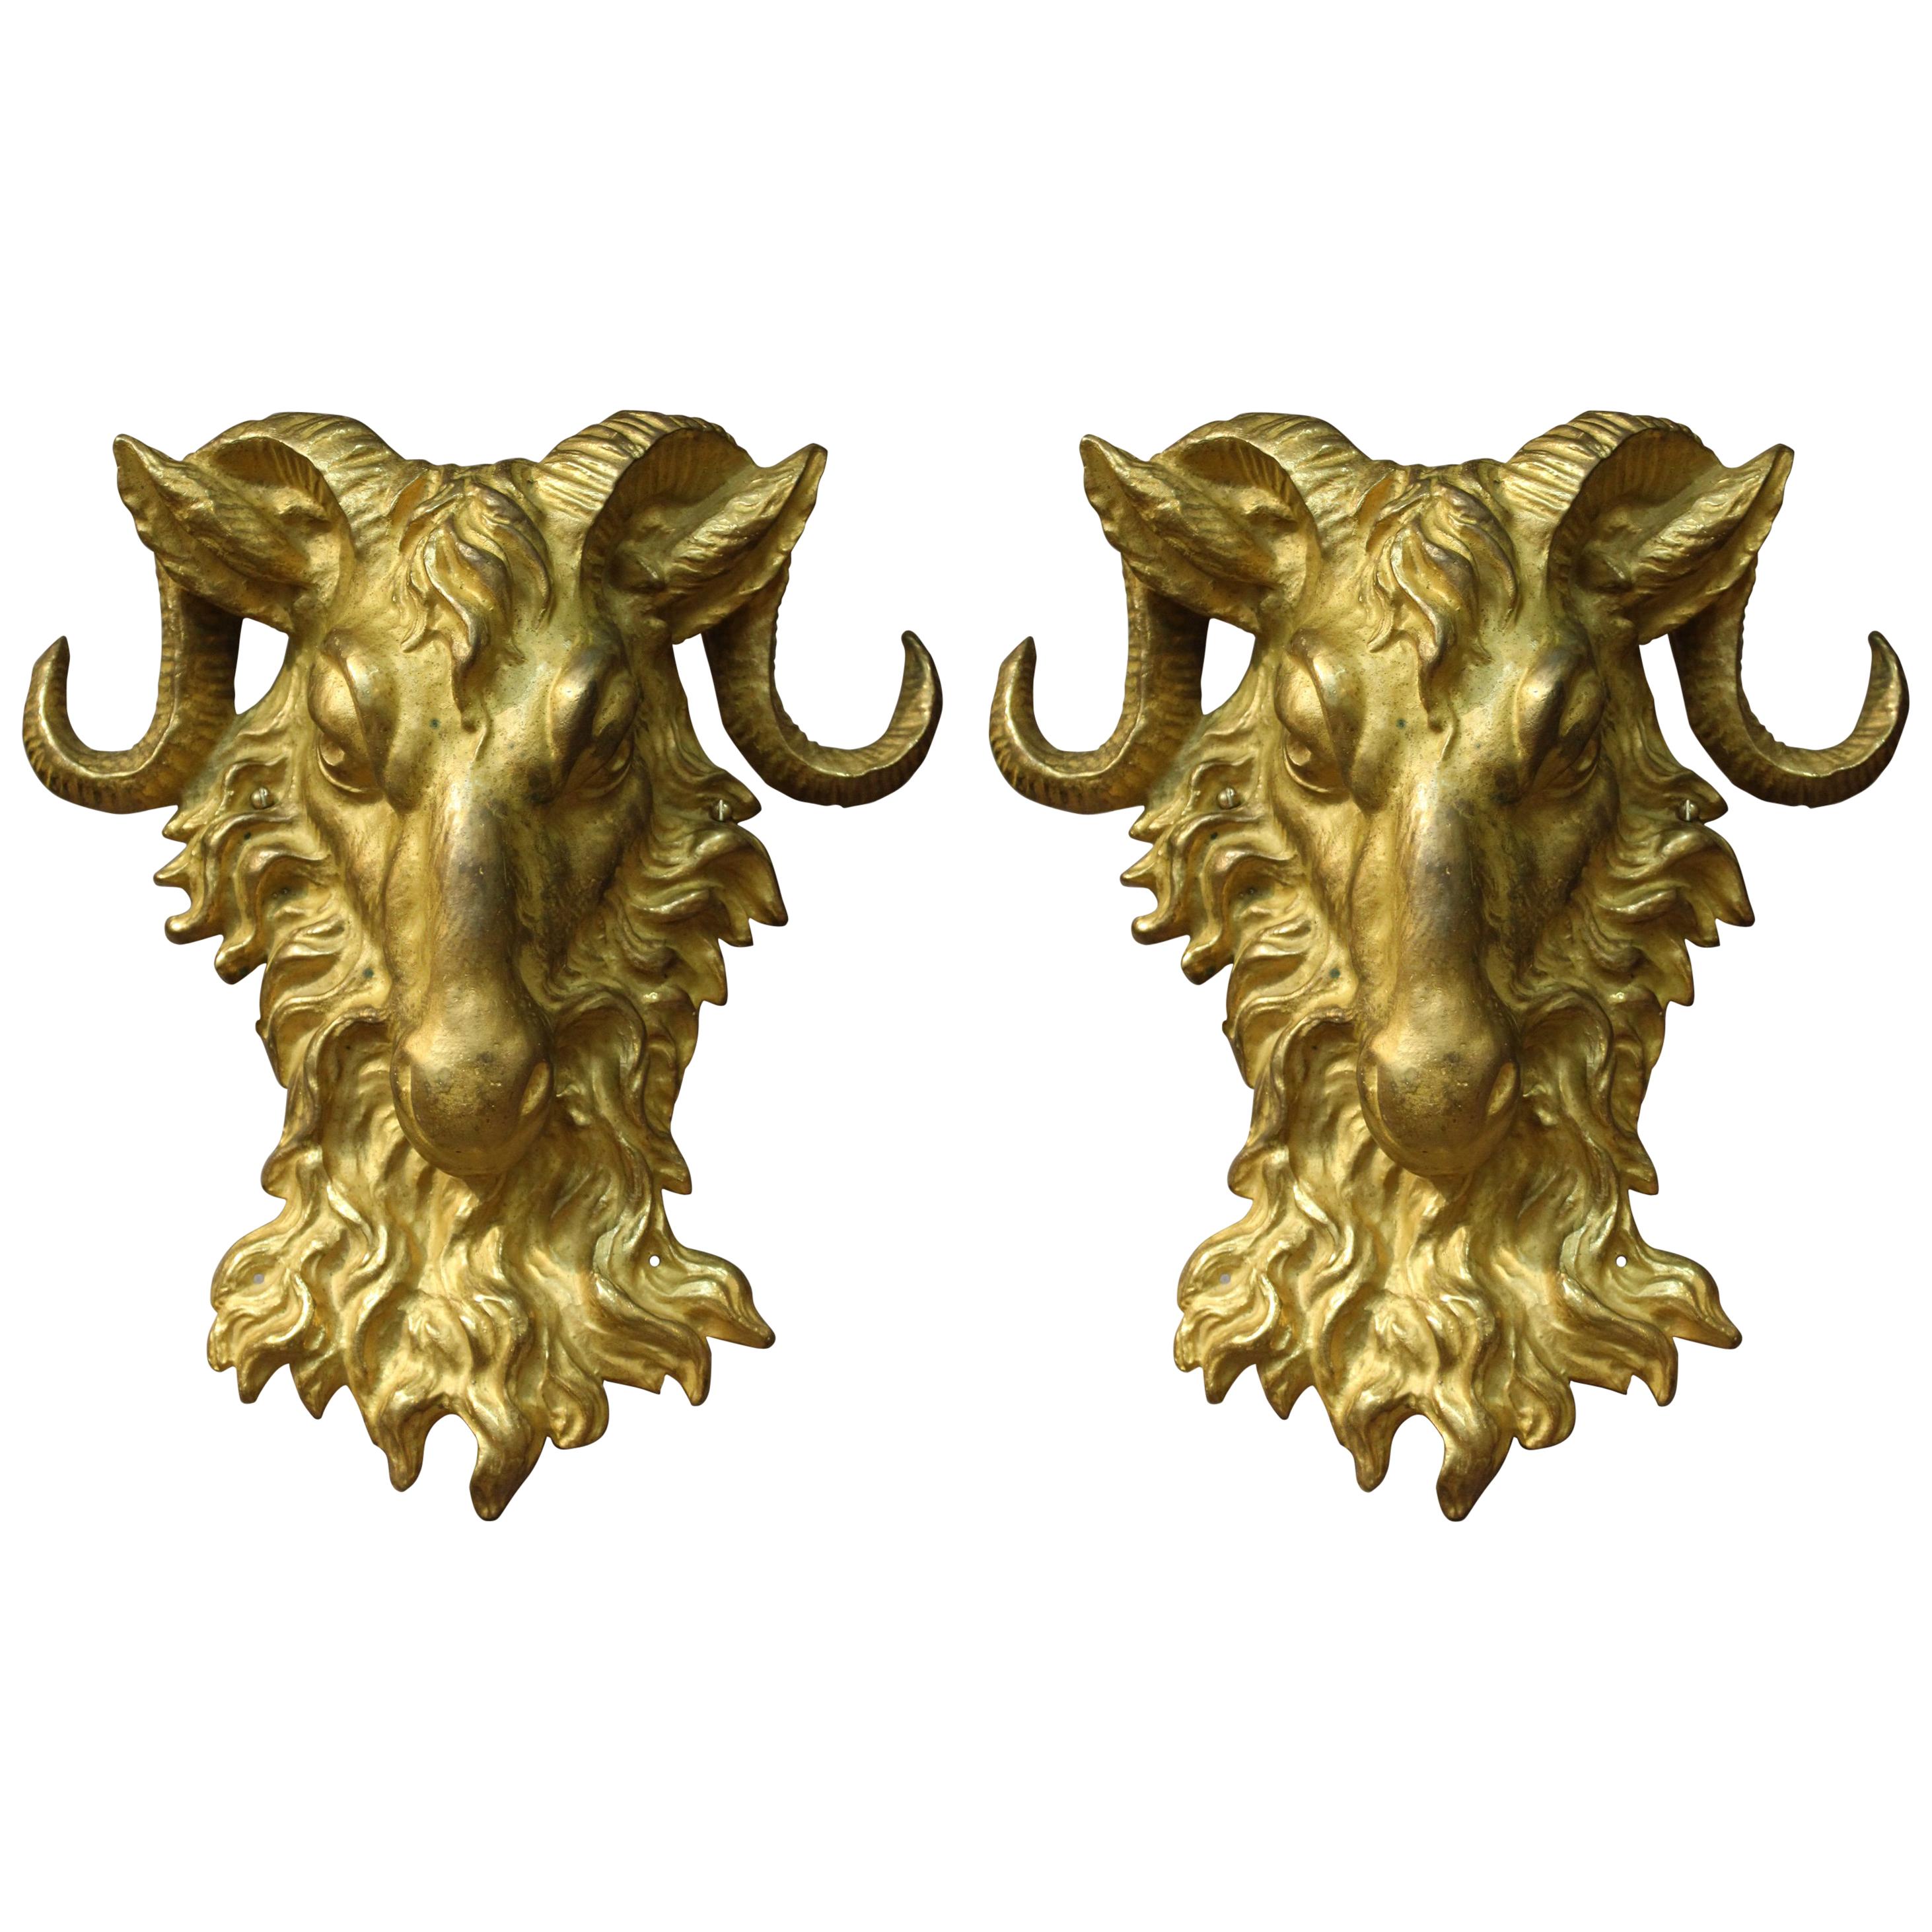 American Gilded Age Rams Head Sconces in Gilt Bronze